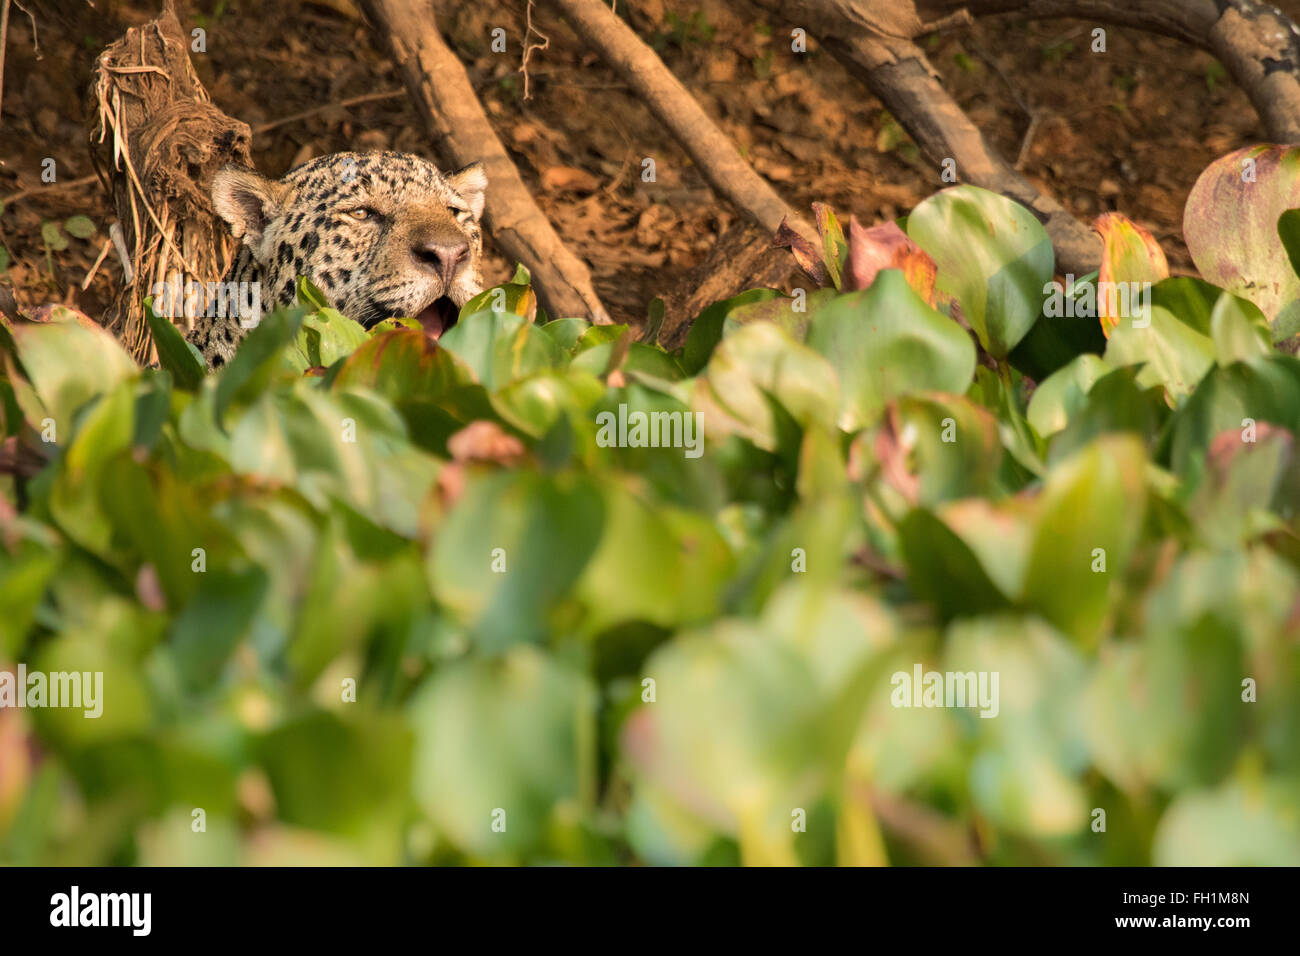 A wild male jaguar on the banks of the Cuiaba river in the Pantanal, Brazil. Stock Photo